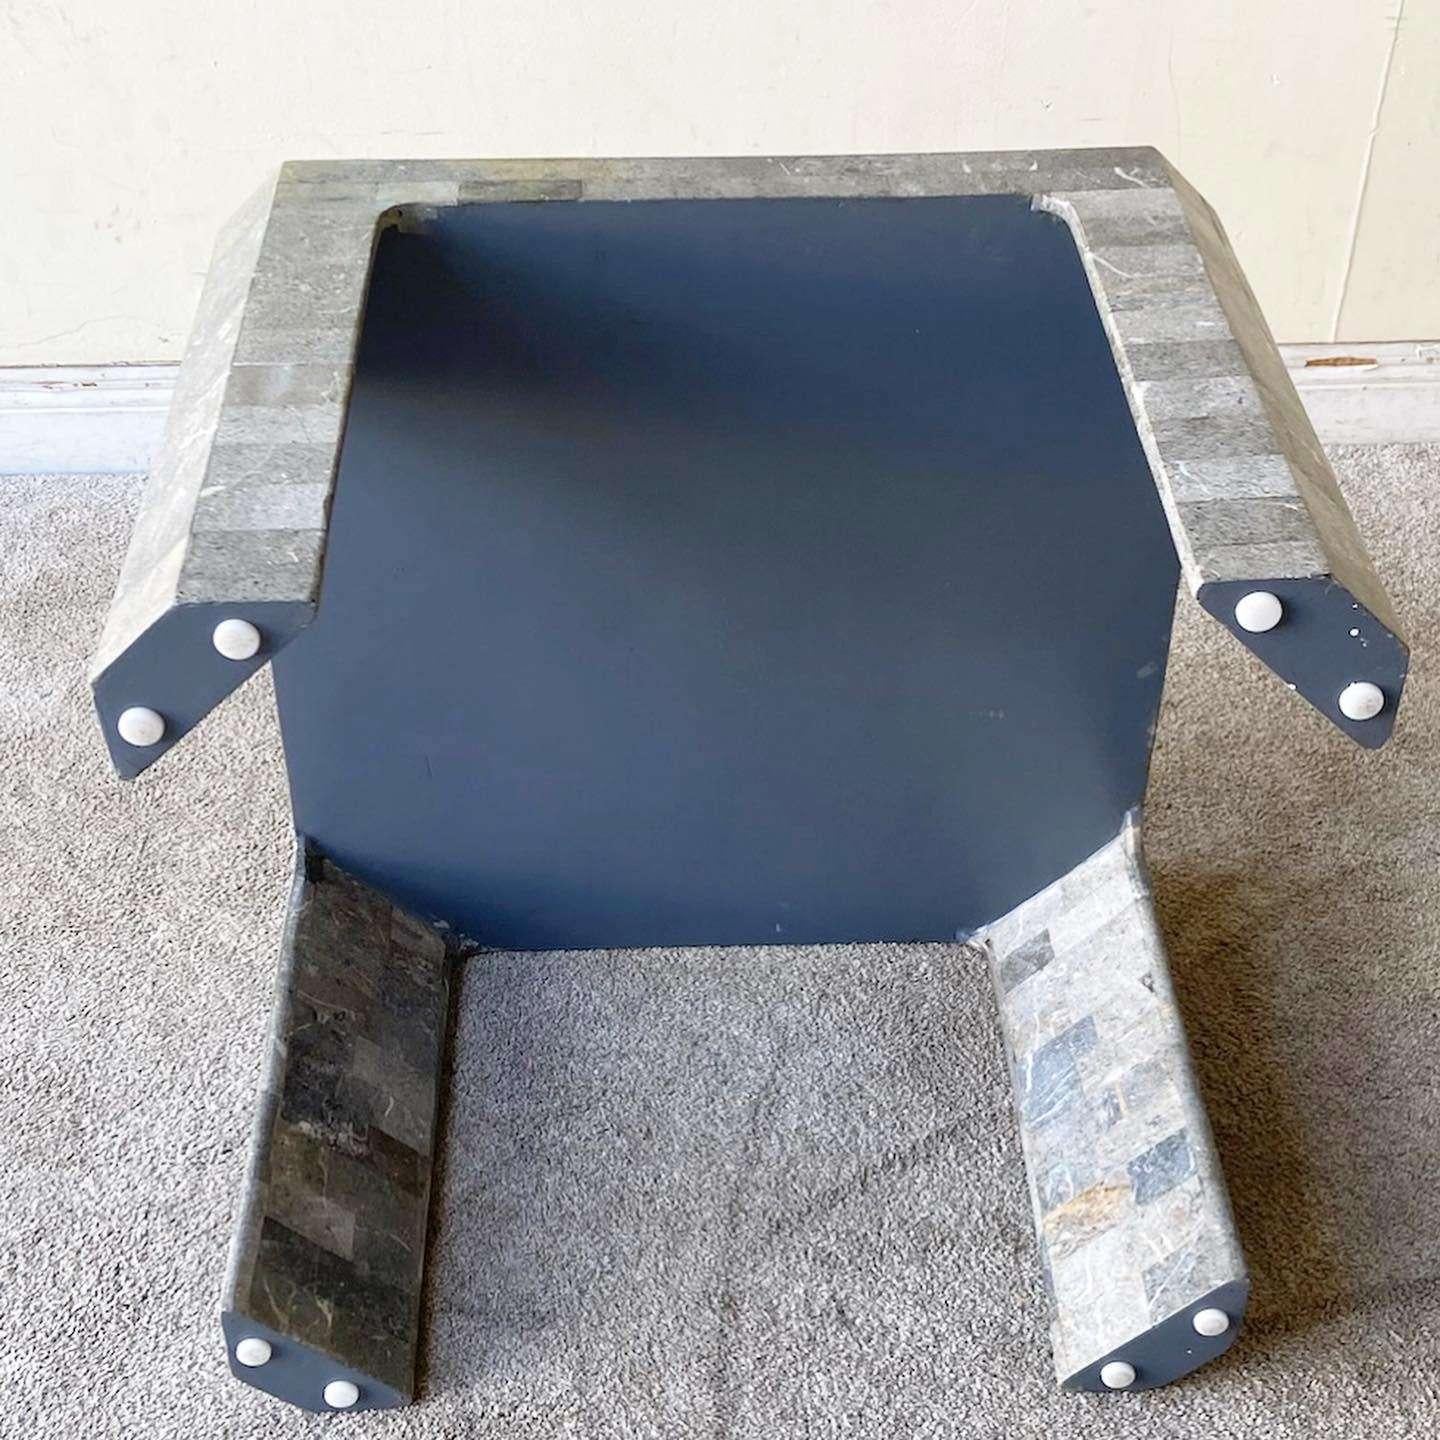 Exceptional vintage postmodern tessellated stone side table. Features charcoal polished stone throughout with a beige border around the top.